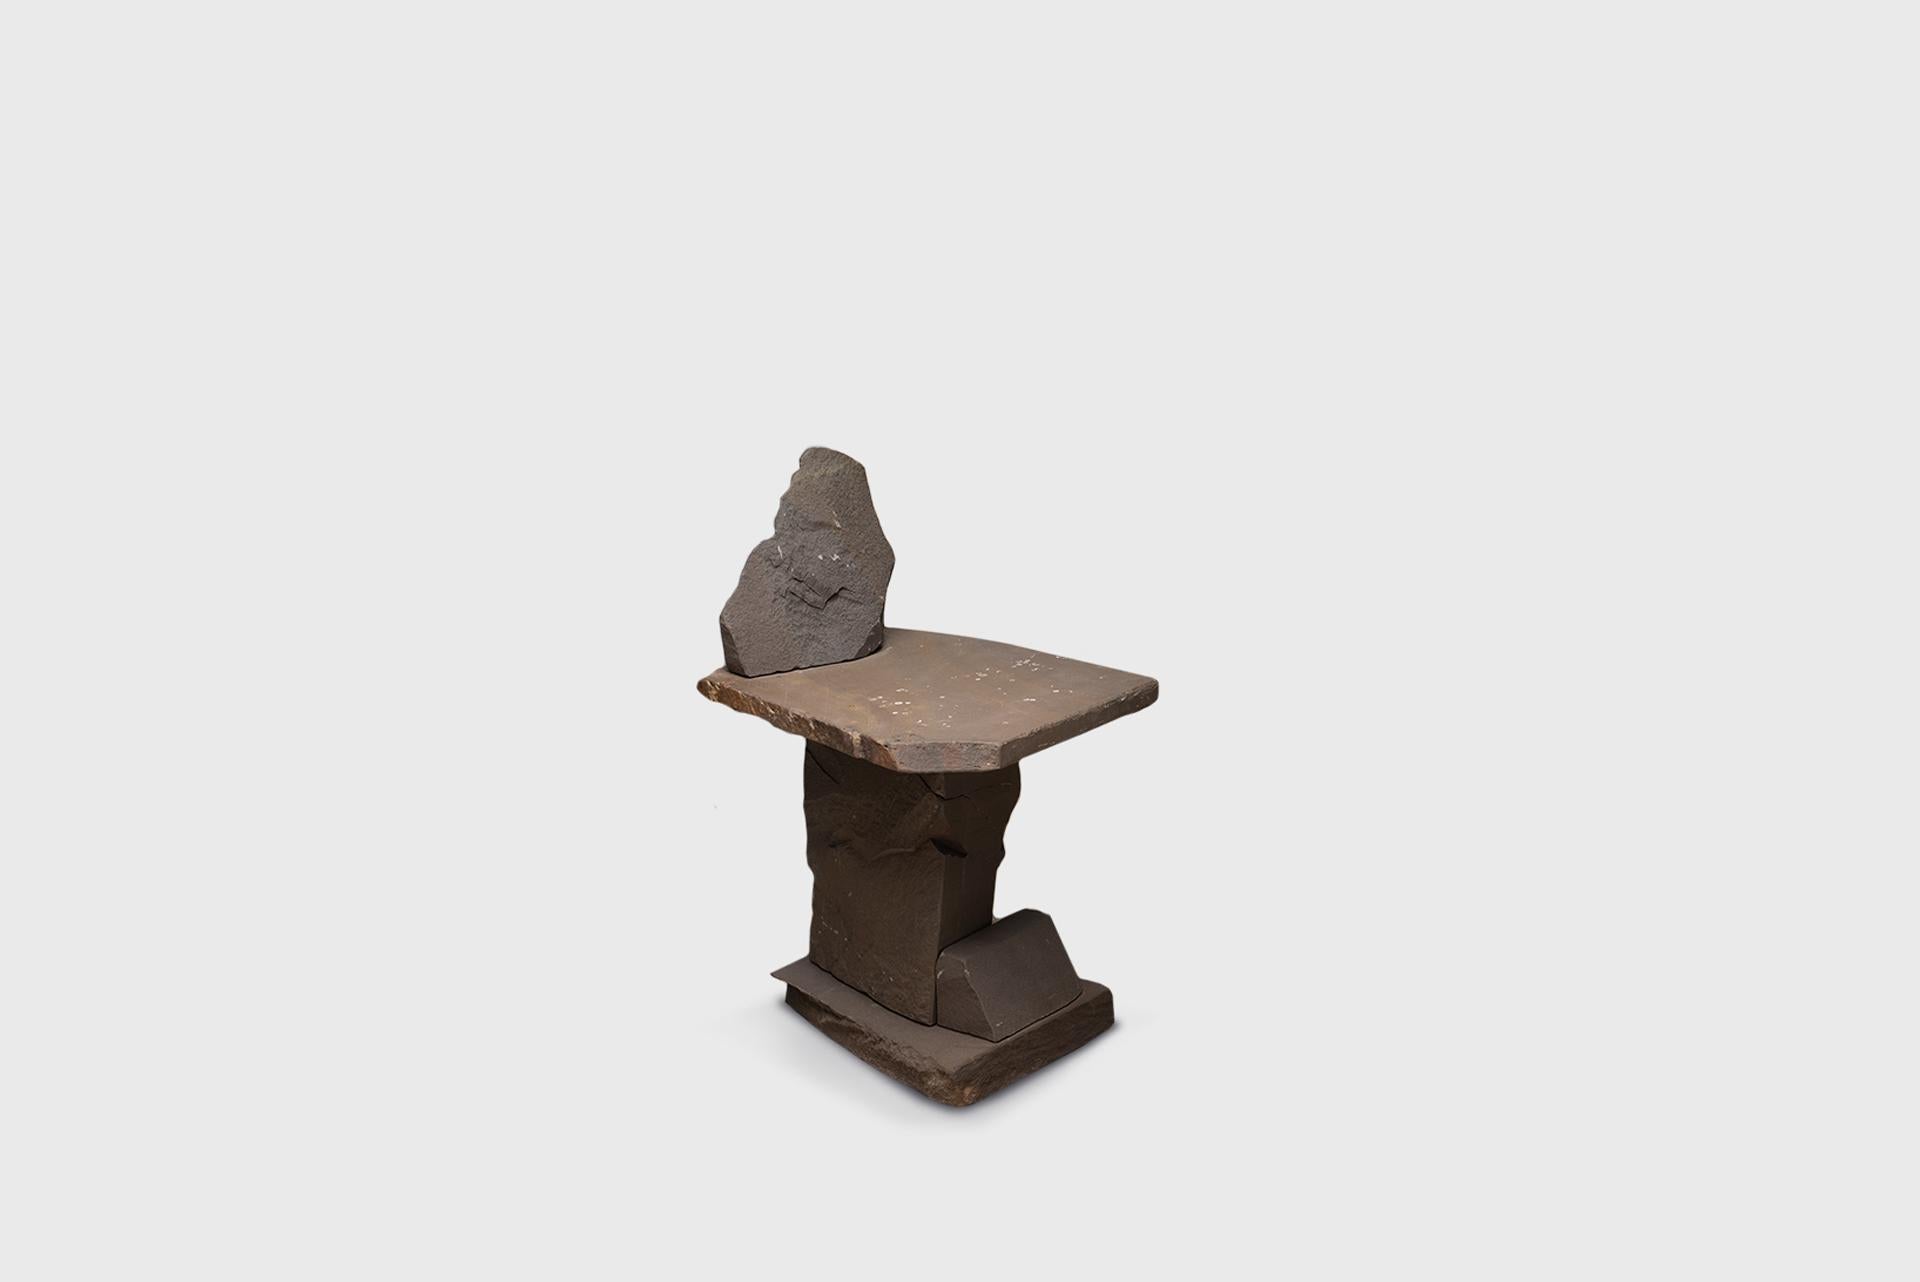 Contemporary Natural Chair 22, Graywacke Offcut Gray Stone, Carsten in Der Elst For Sale 3